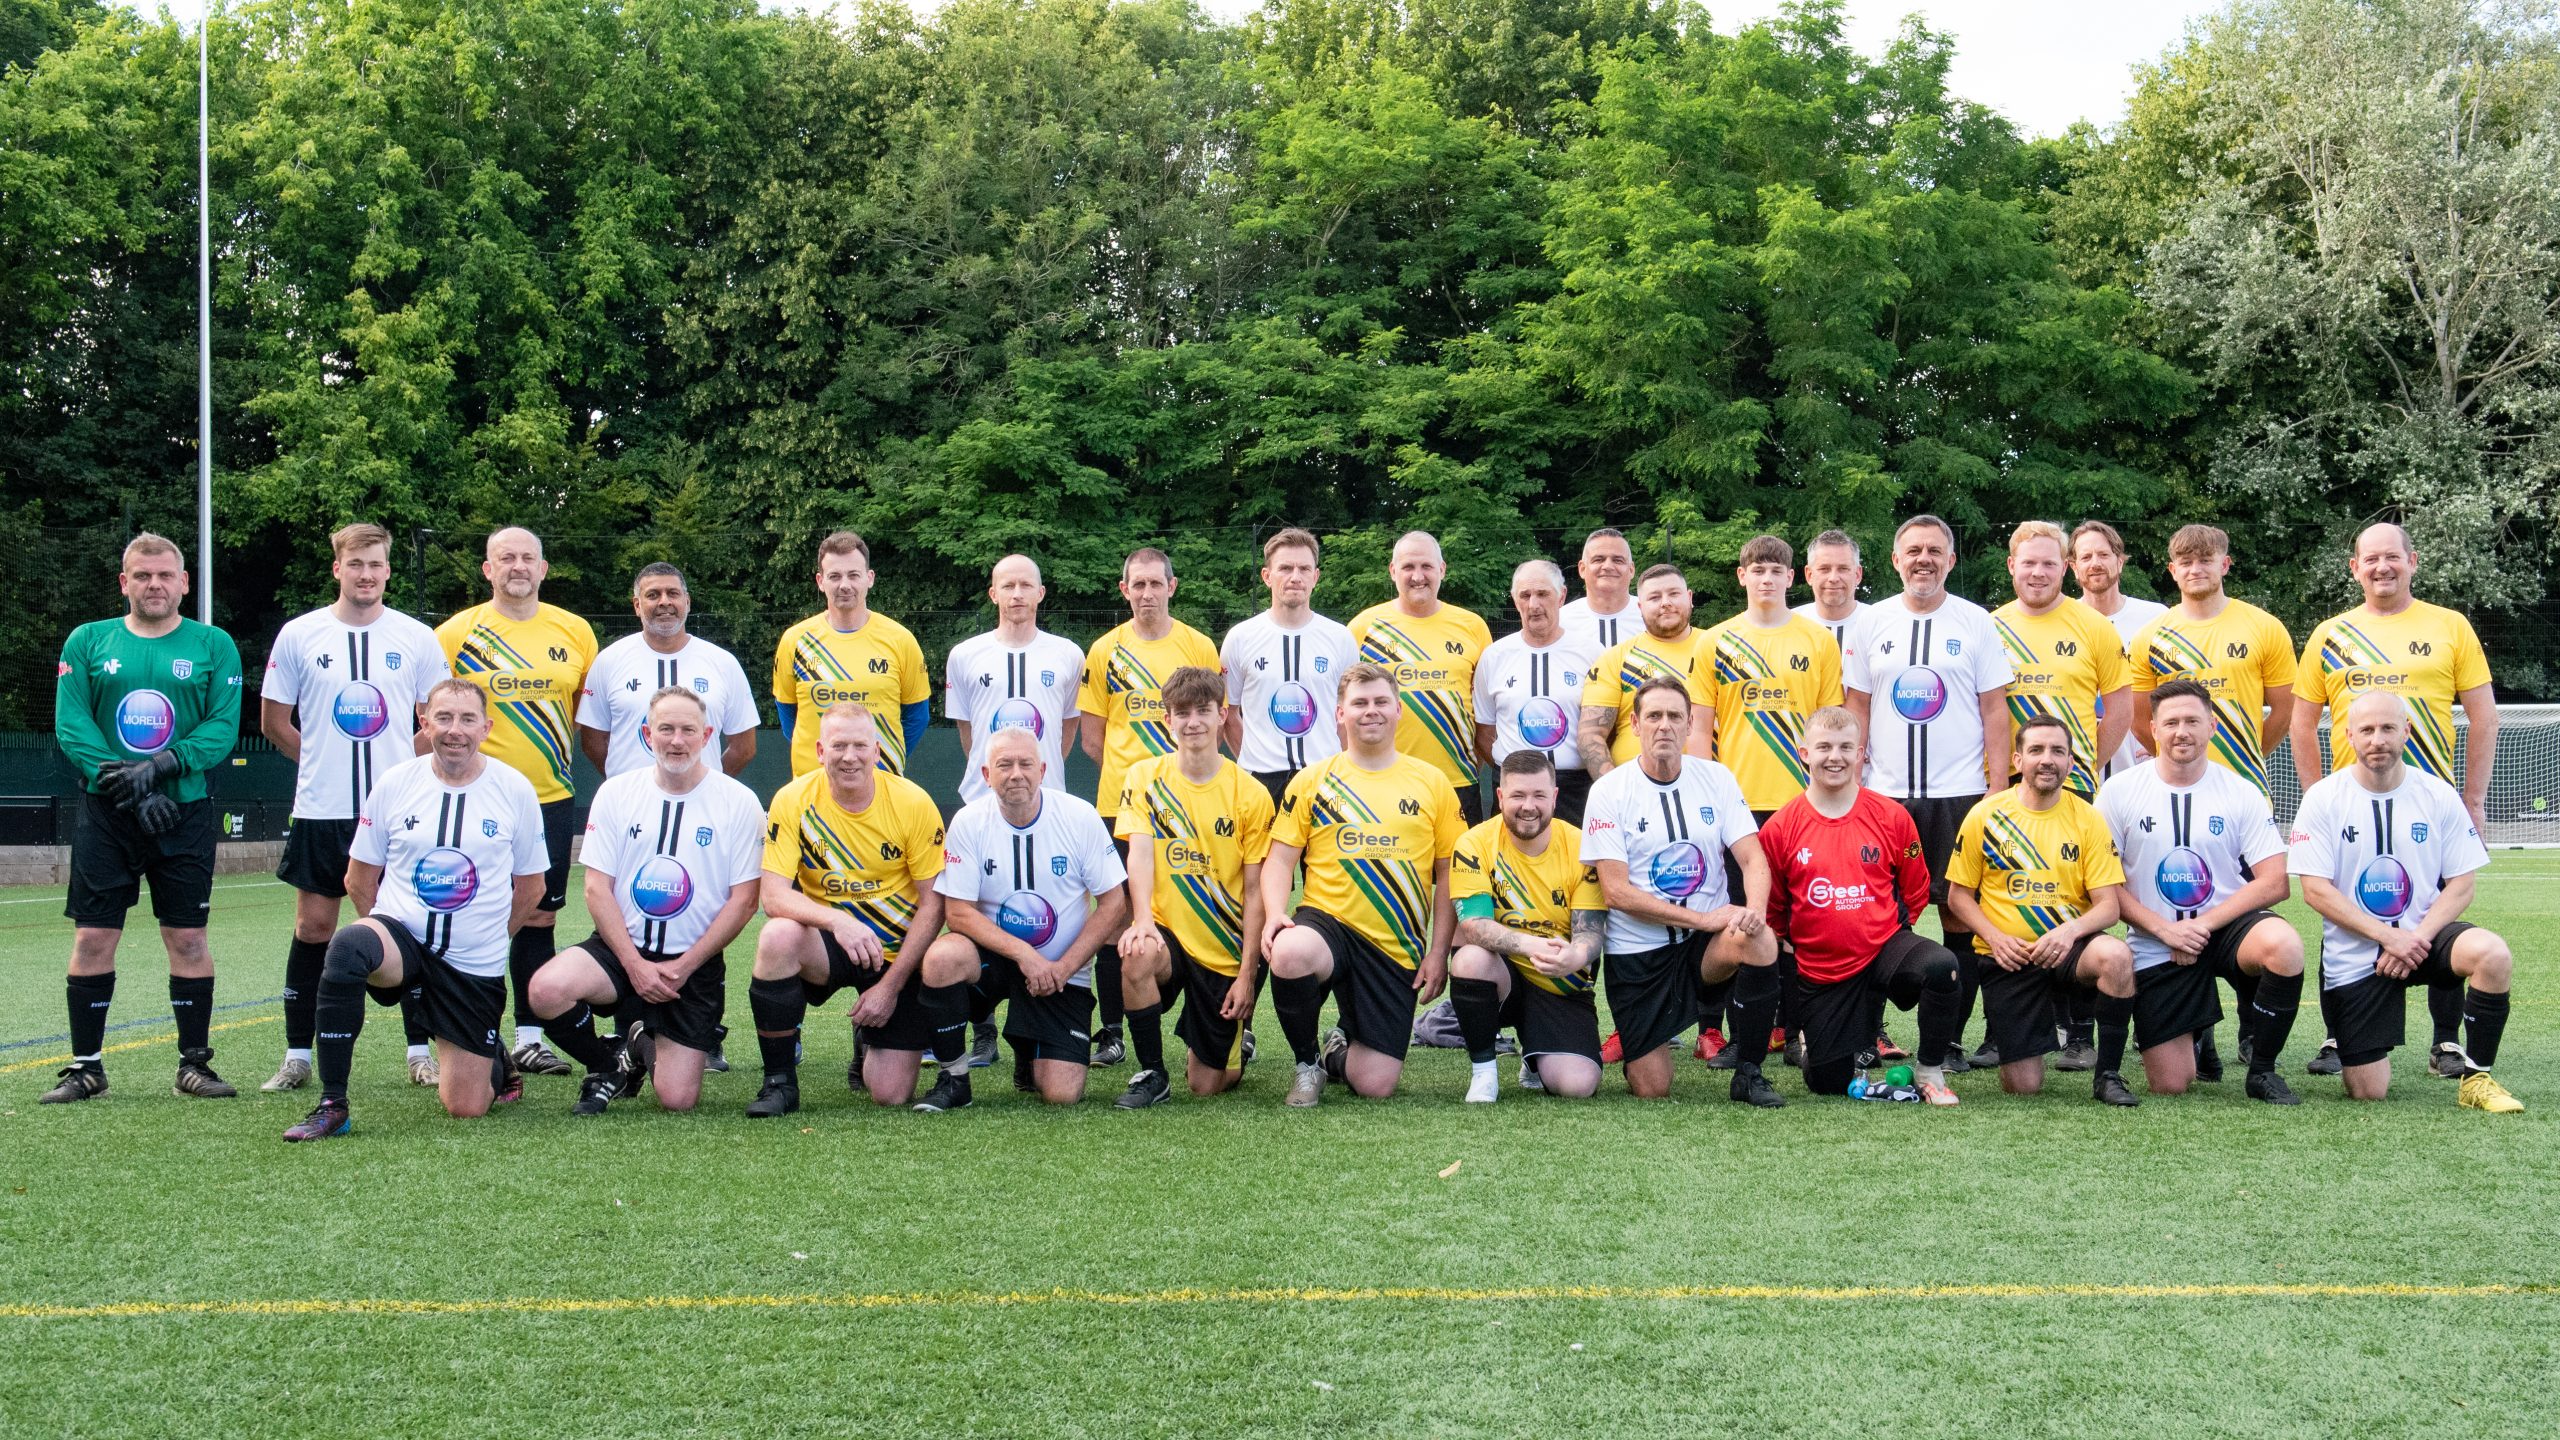 Football match raises thousands in memory of firefighter